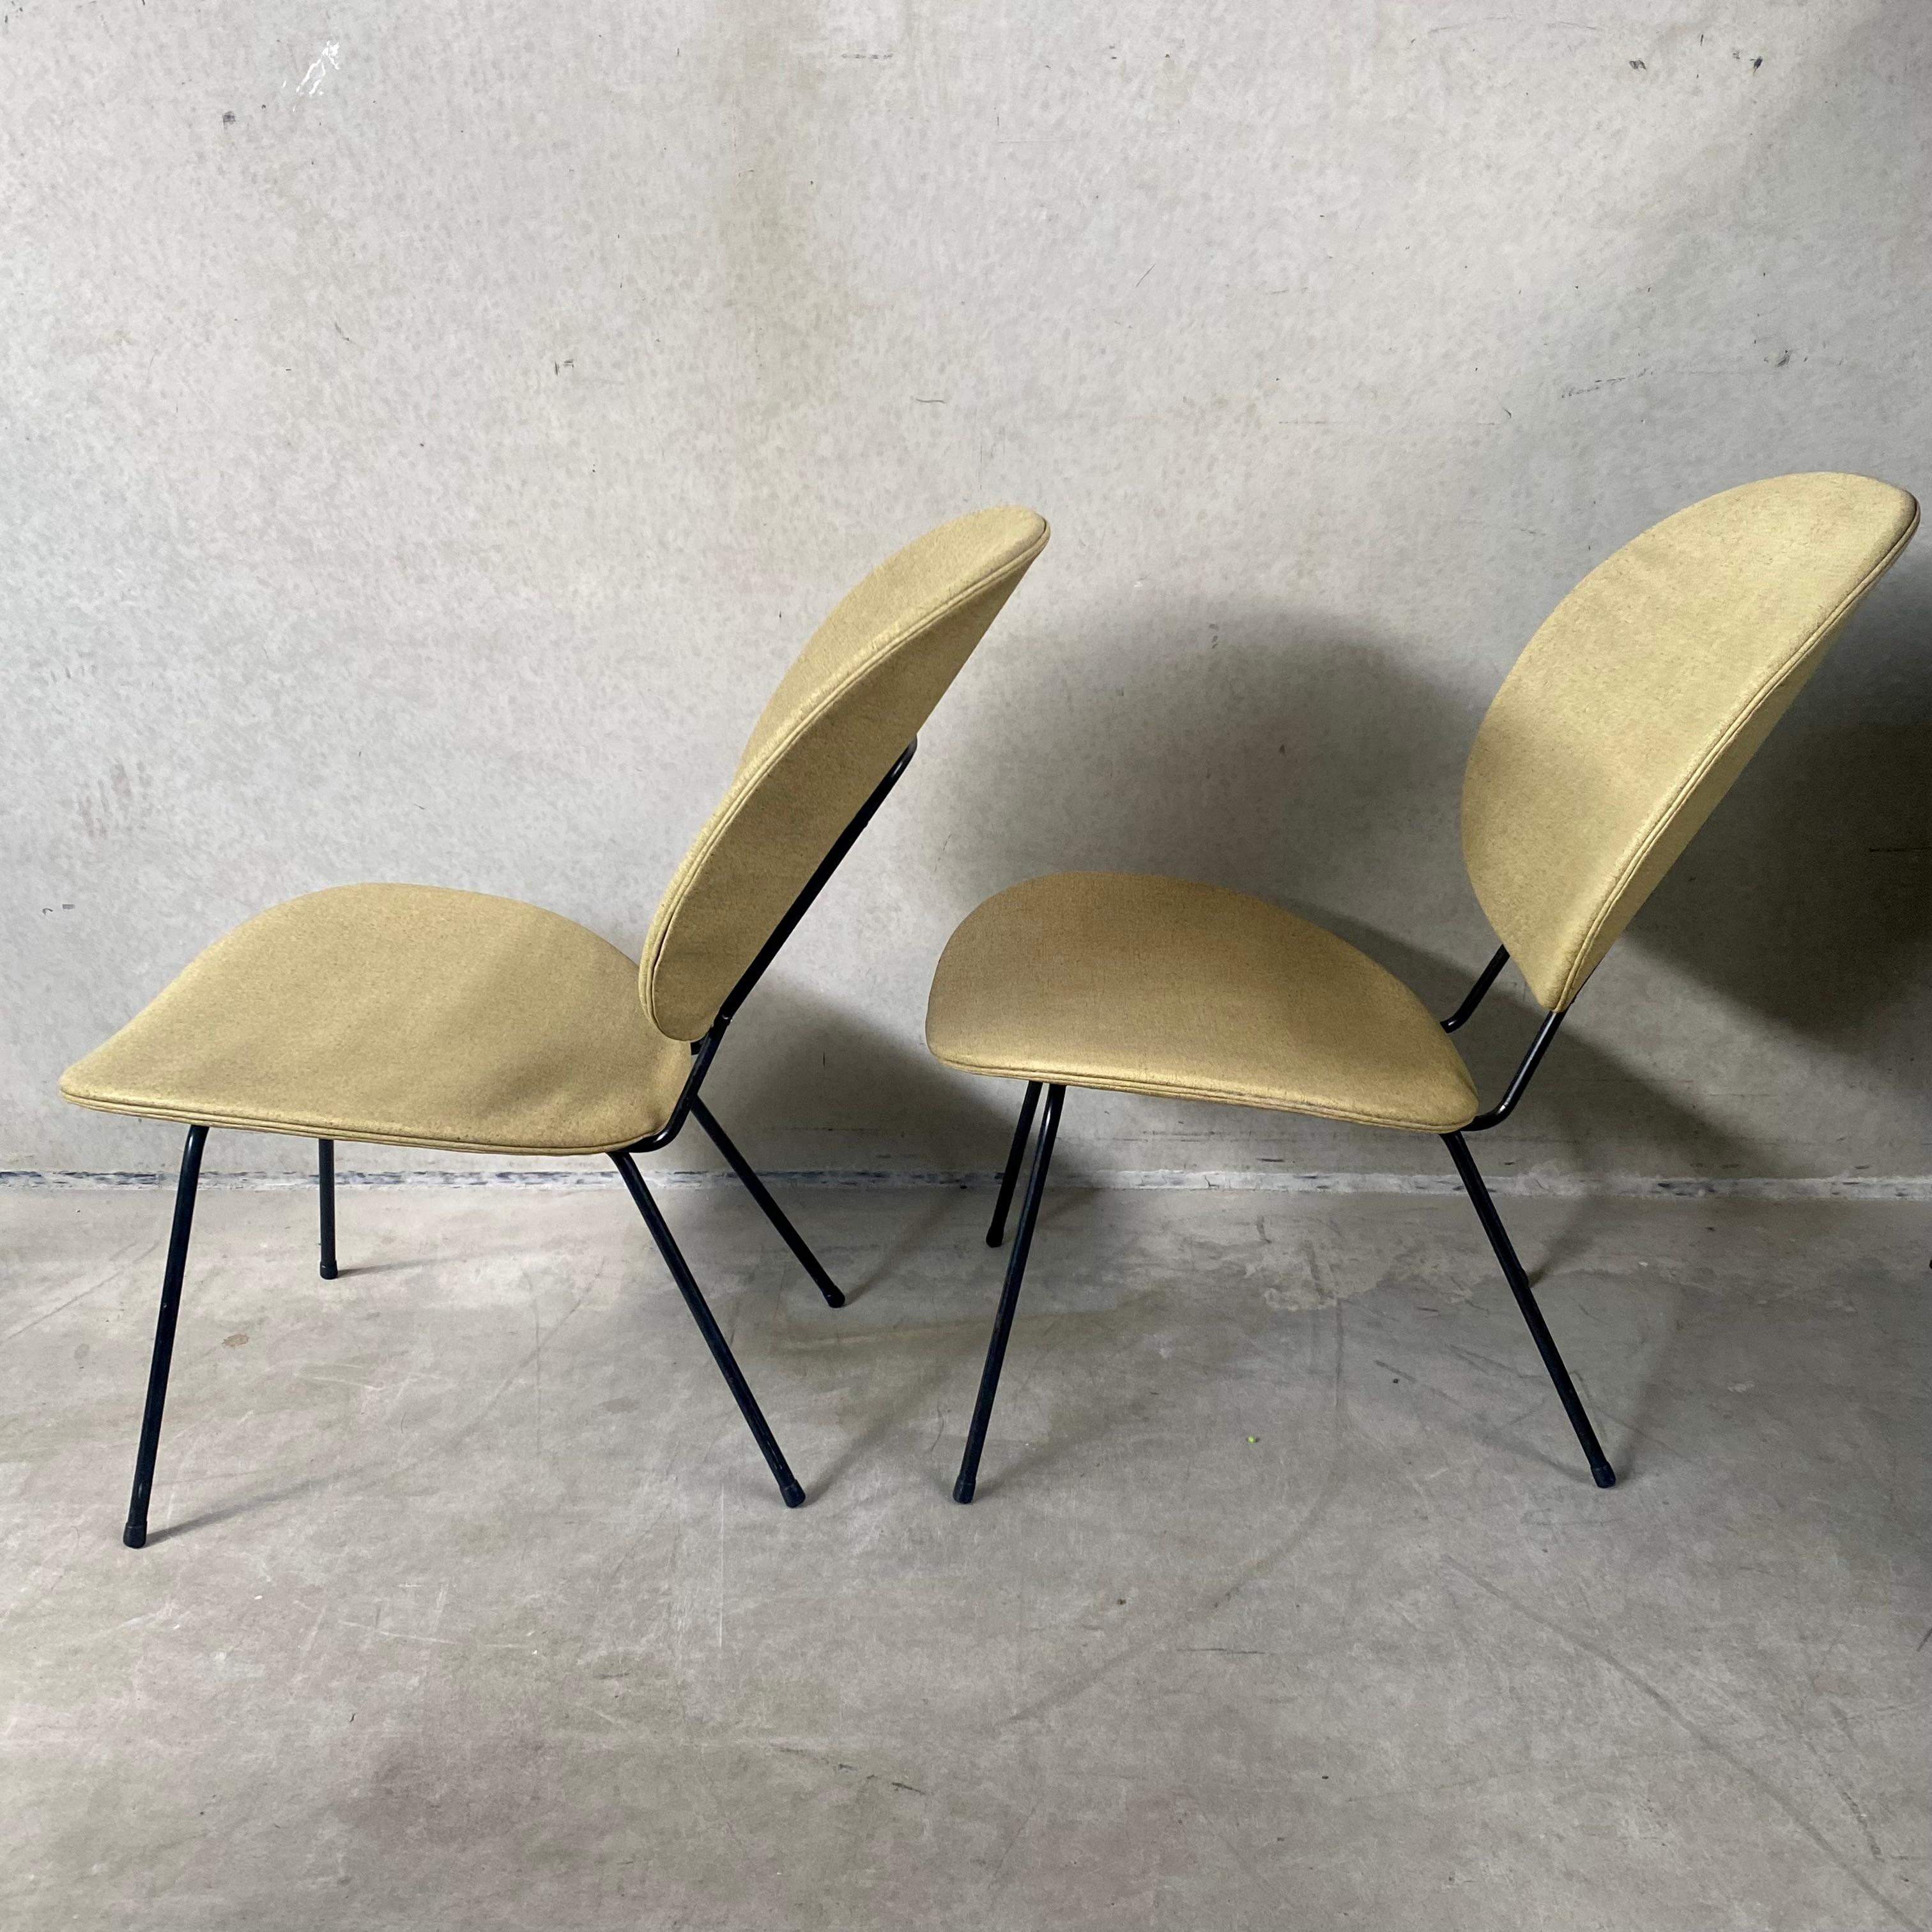 Mid-20th Century Set of 2 Lounge Chairs by W.H. Gispen for Kembo, Netherlands 1950 For Sale